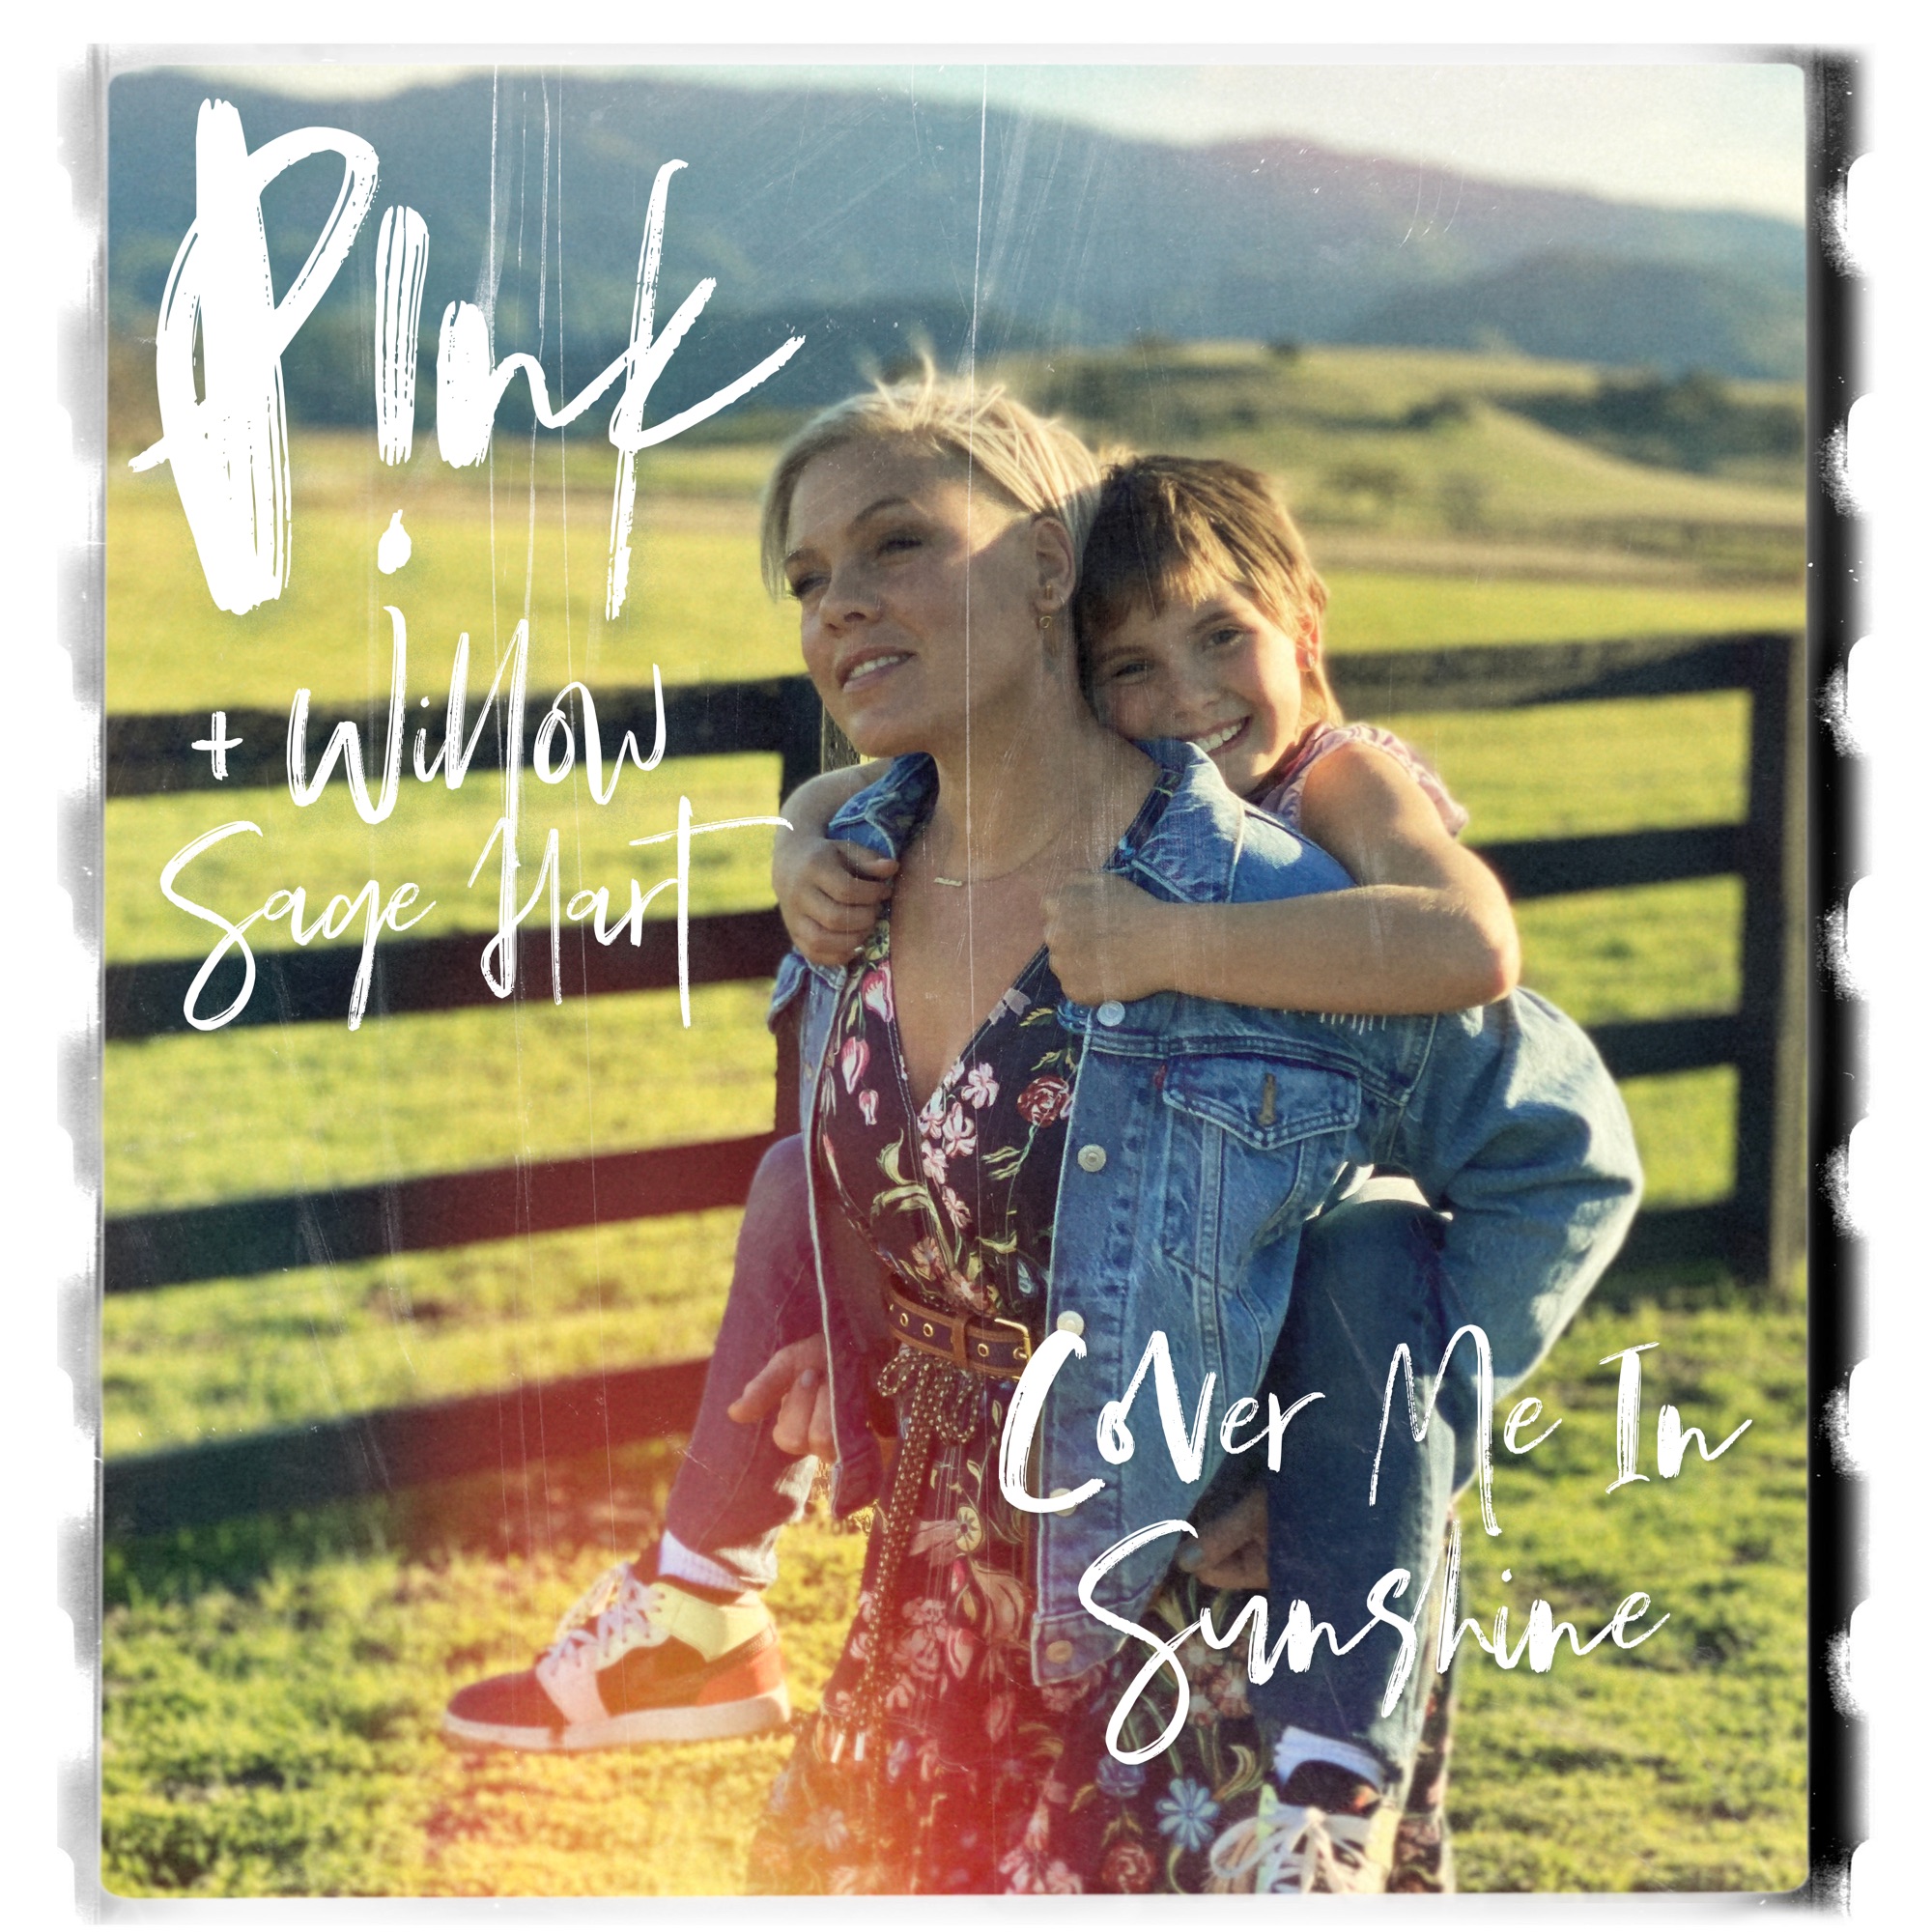 P!nk & Willow Sage Hart - Cover Me In Sunshine - Single